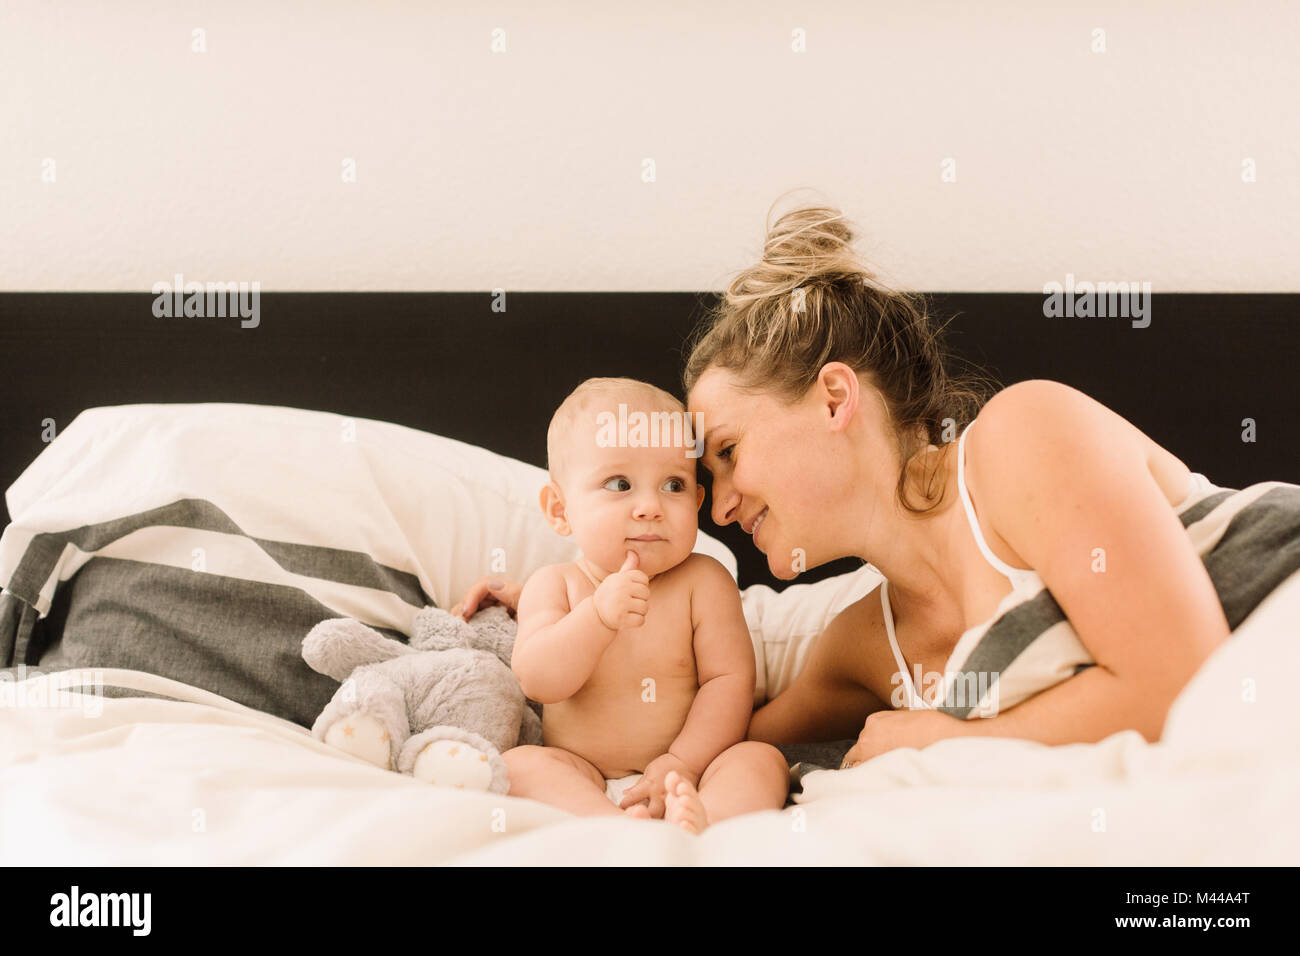 Woman lying in bed with arm around baby daughter Stock Photo